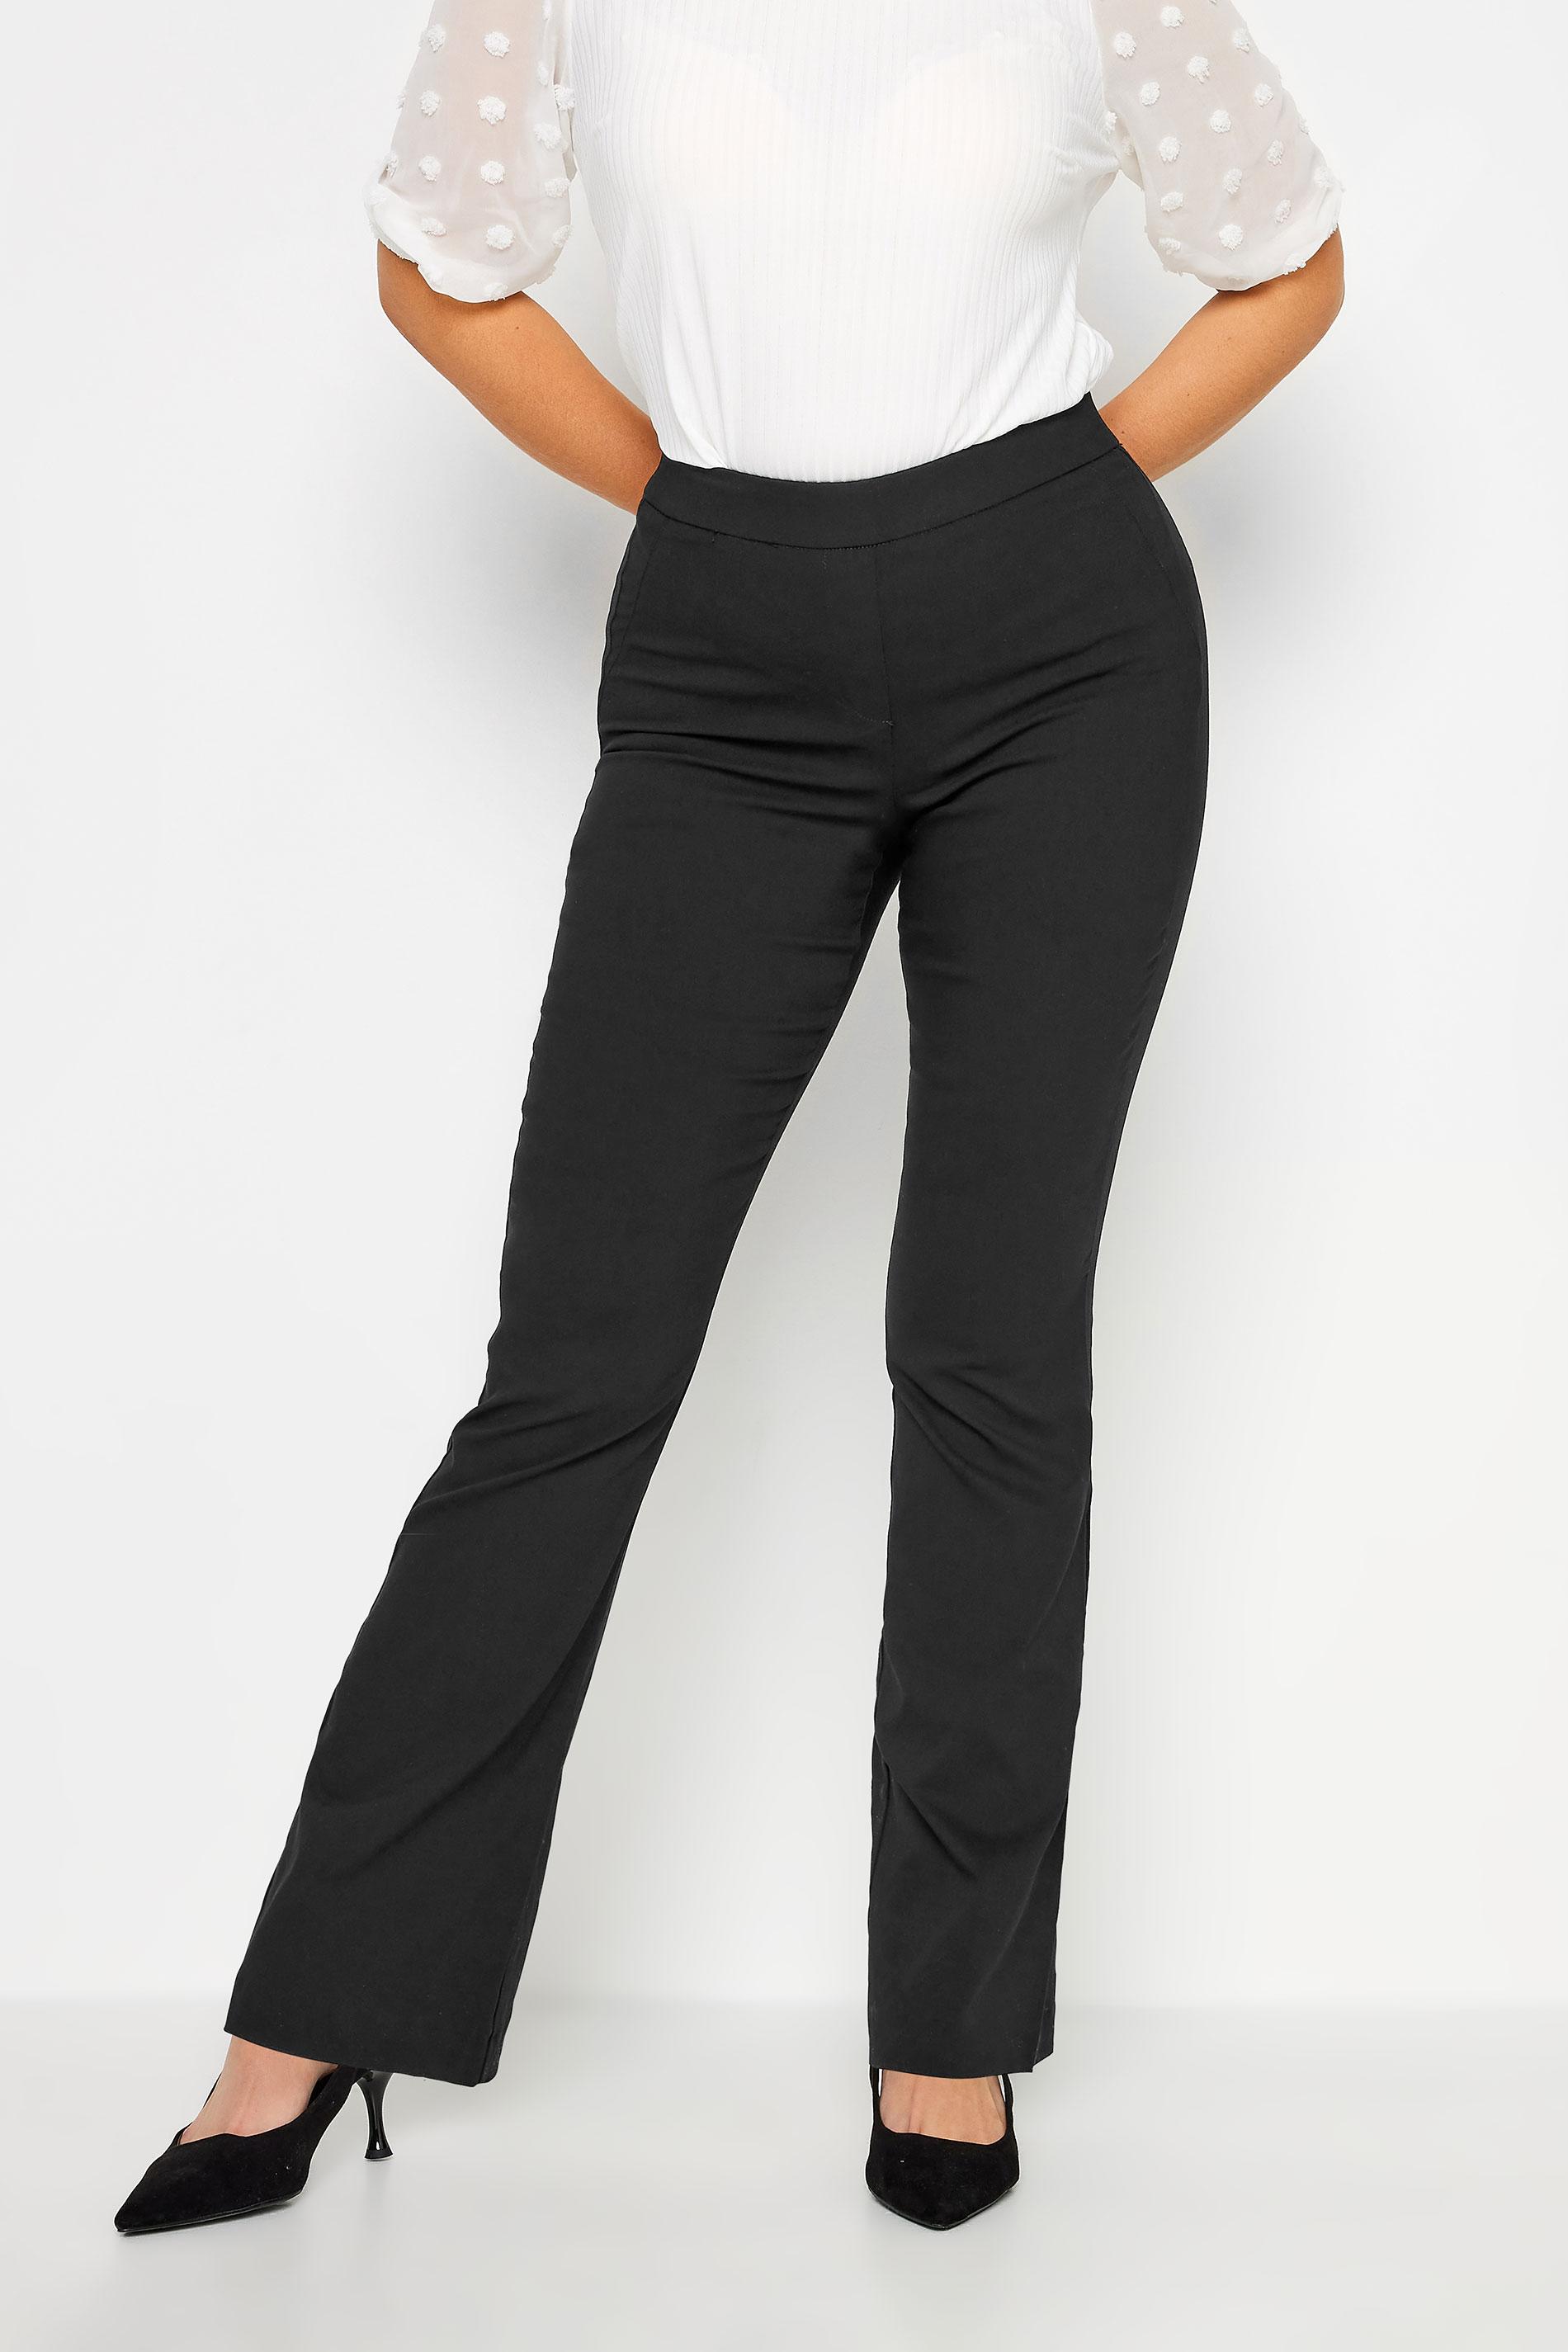 Pomodoro Cropped Bengaline Trousers in Black